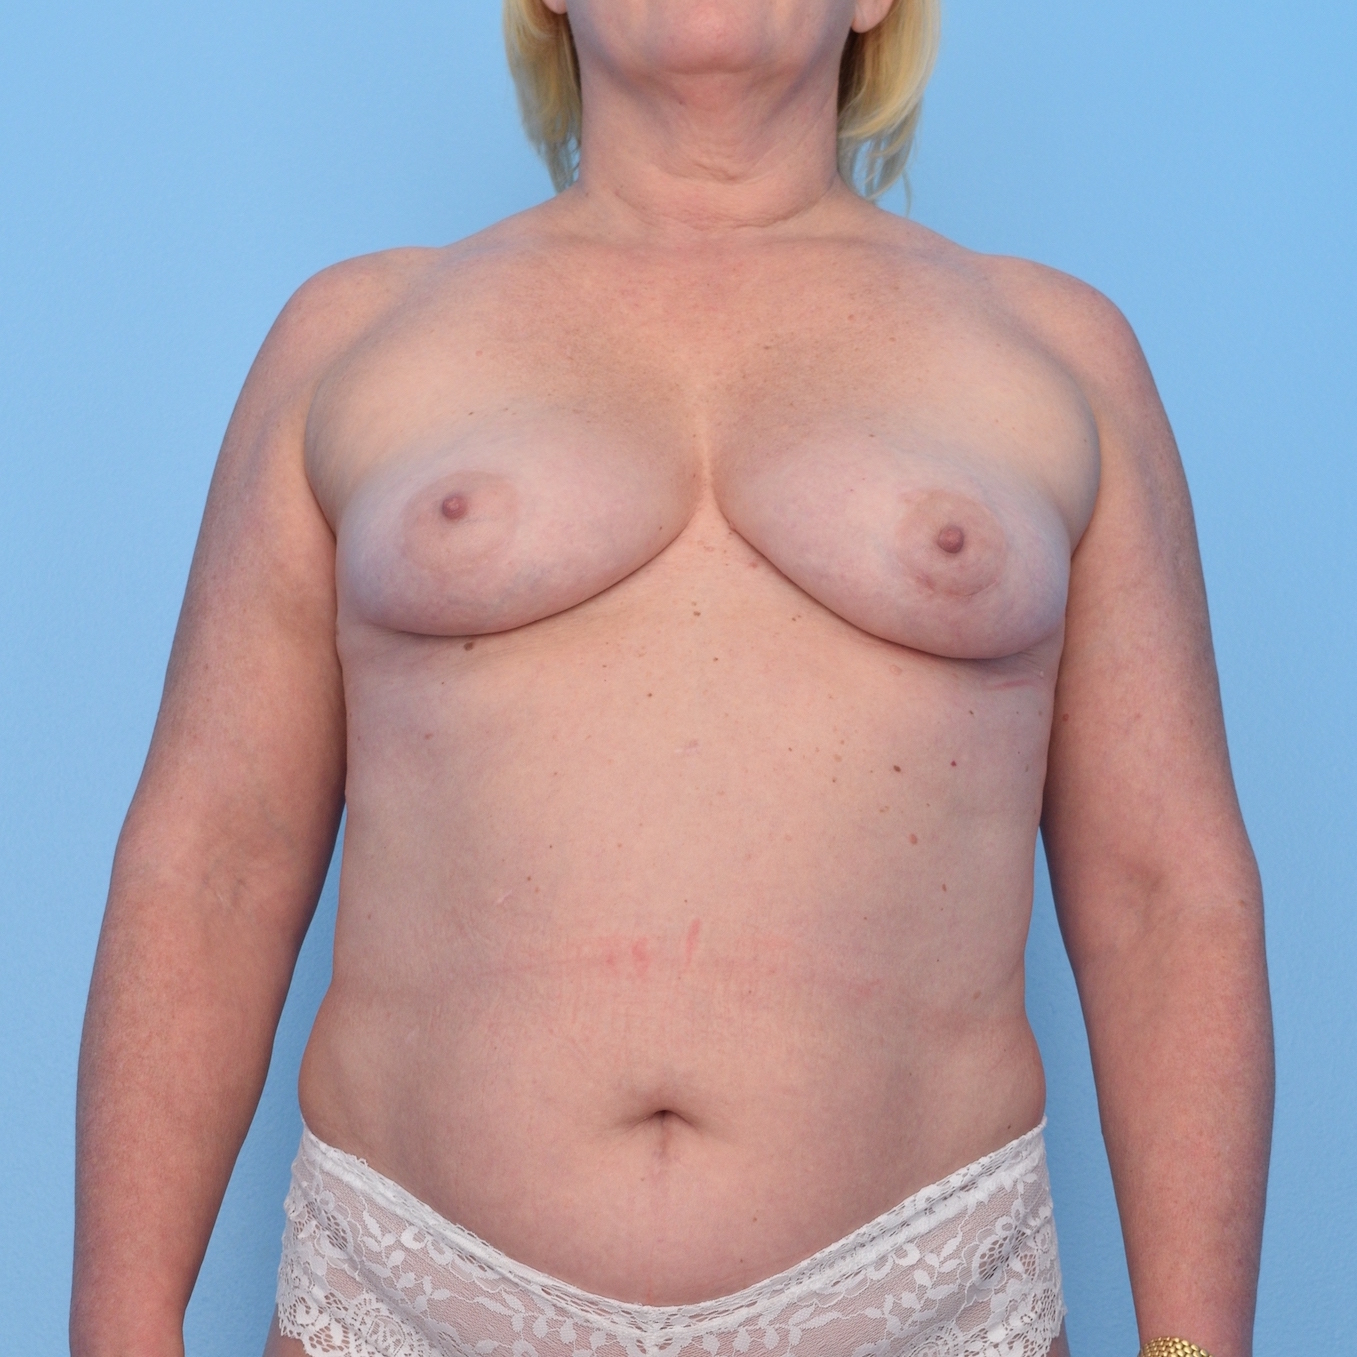 Patient 7 Before Overview - Nipple Sparing Mastectomy Tissue Expander Implant - Breast Cancer Texas